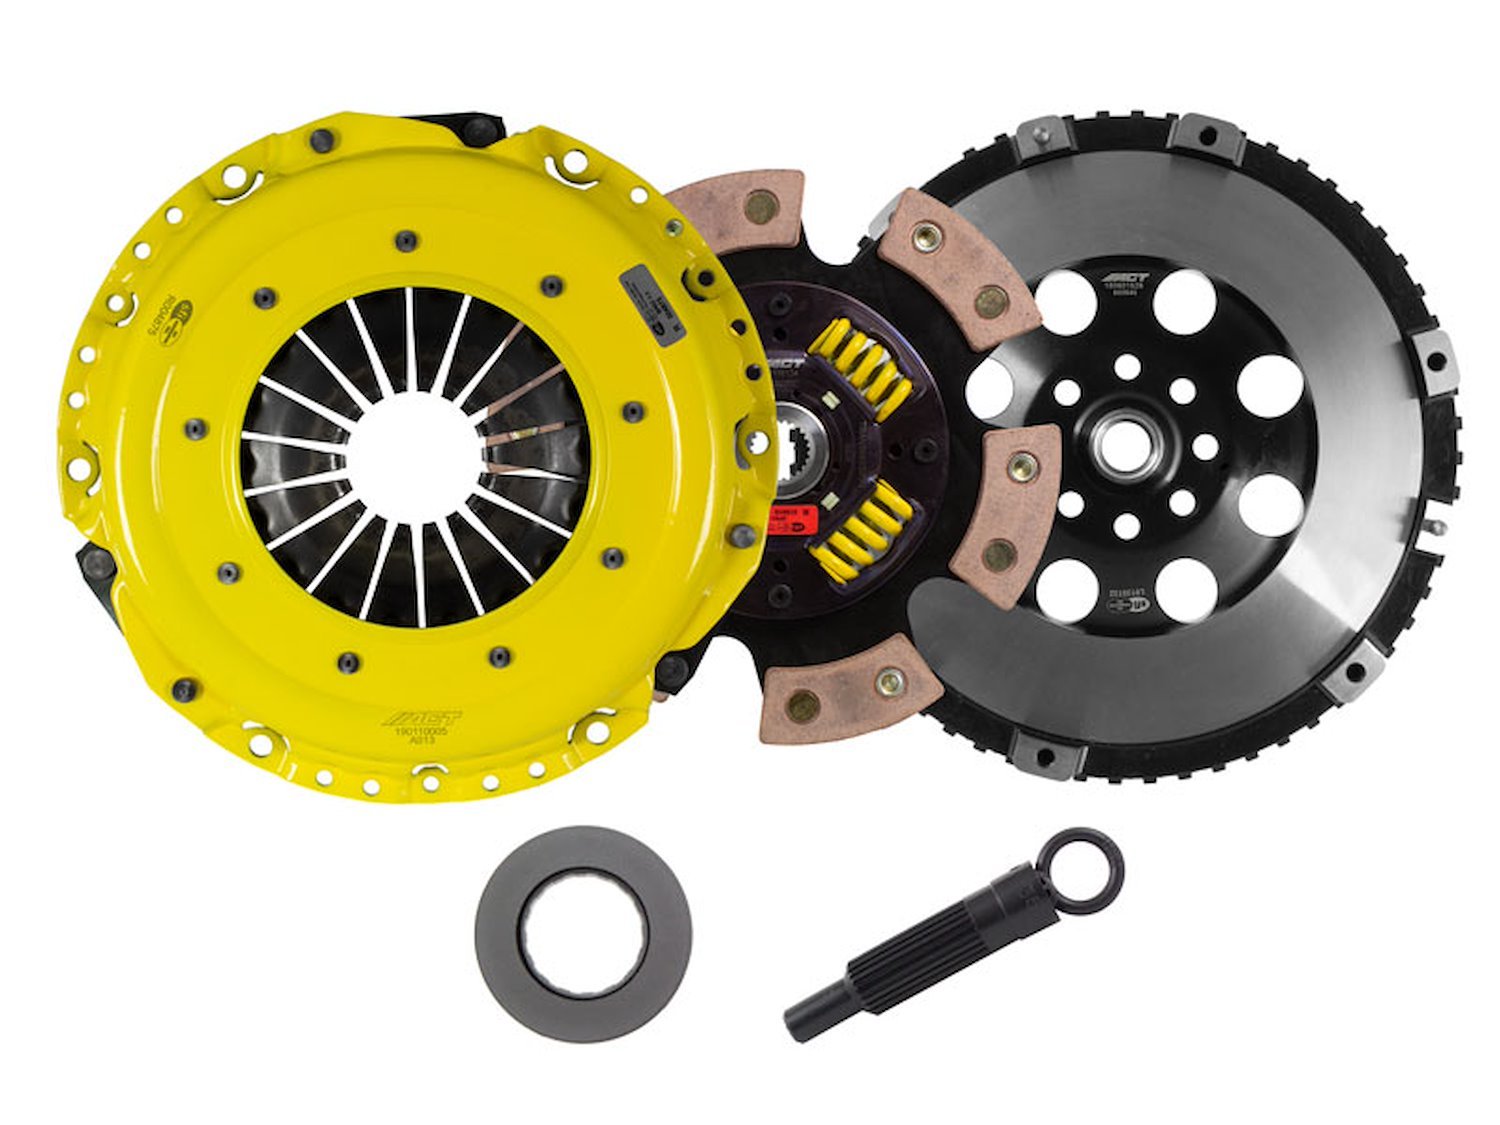 HD/Race Sprung 6-Pad Transmission Clutch Kit Fits Select Audi/Volkswagen